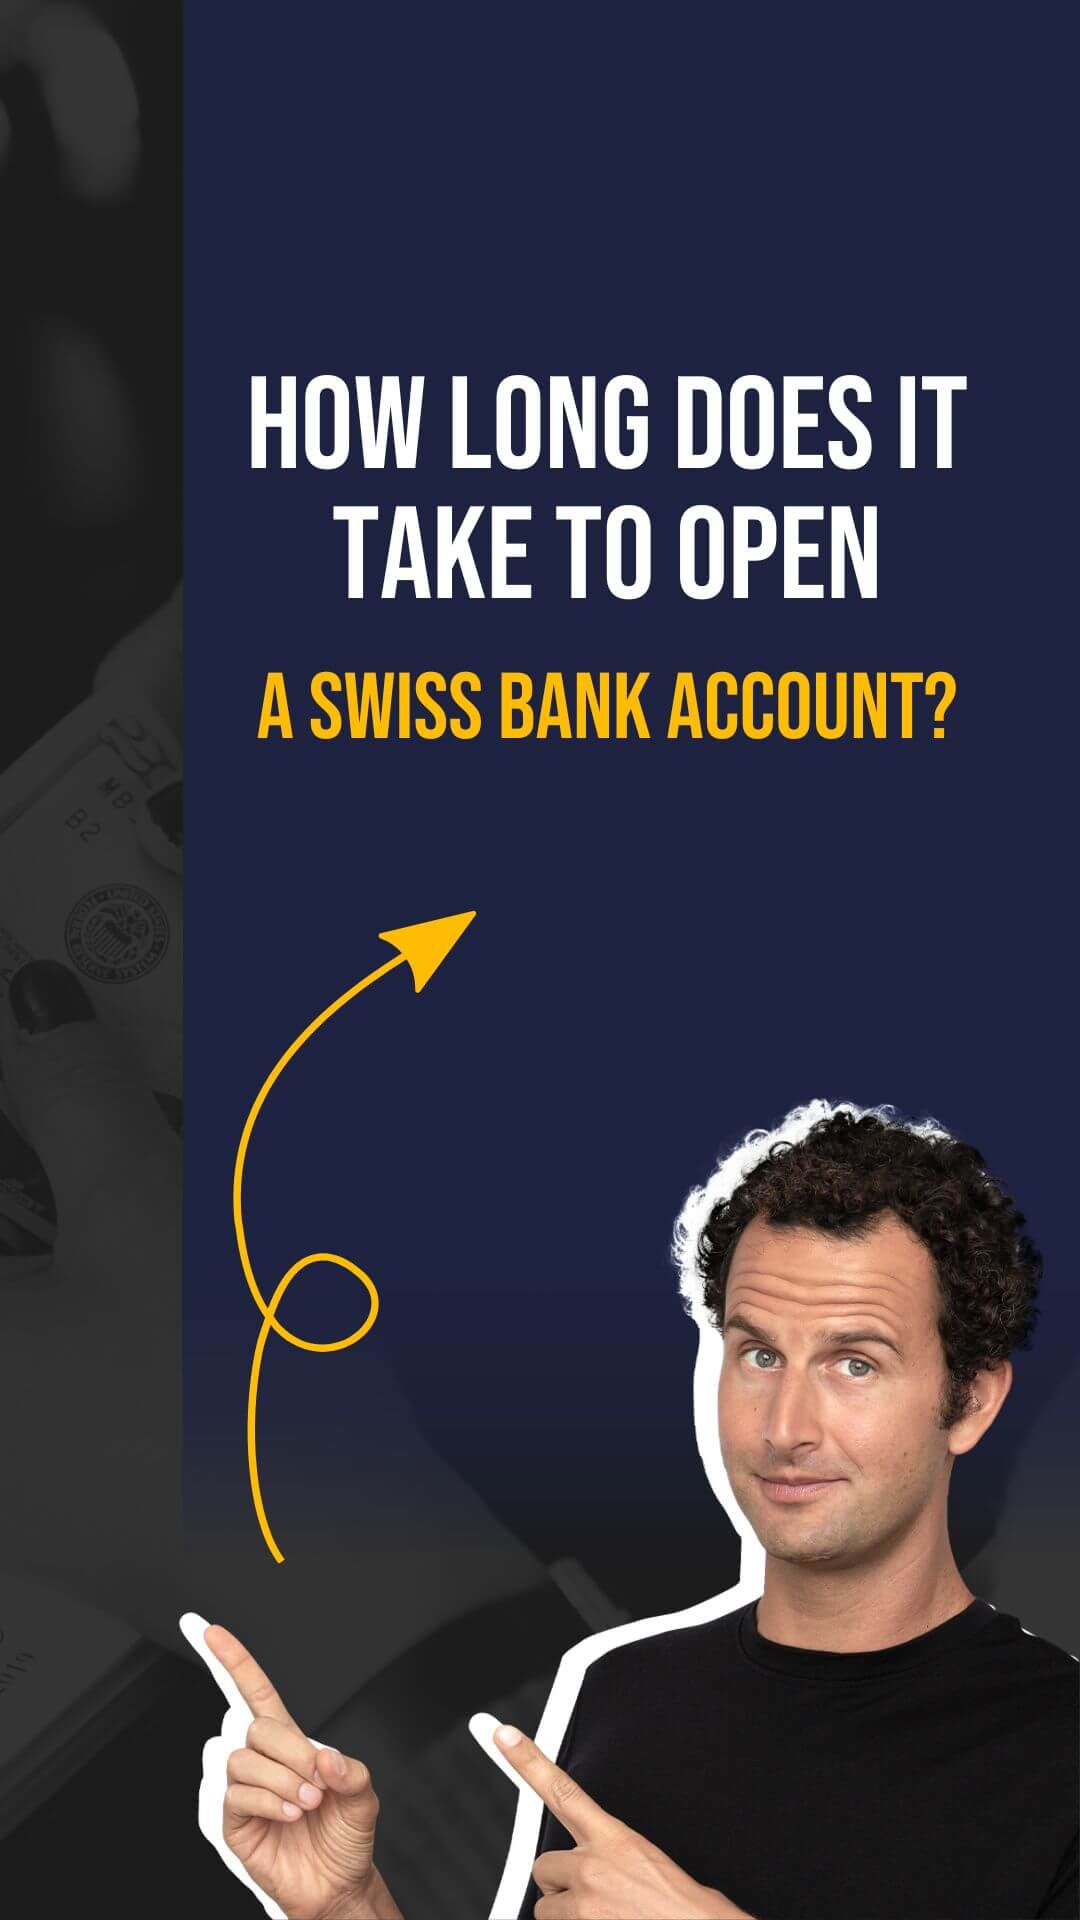 How long does it take to open a swiss bank account